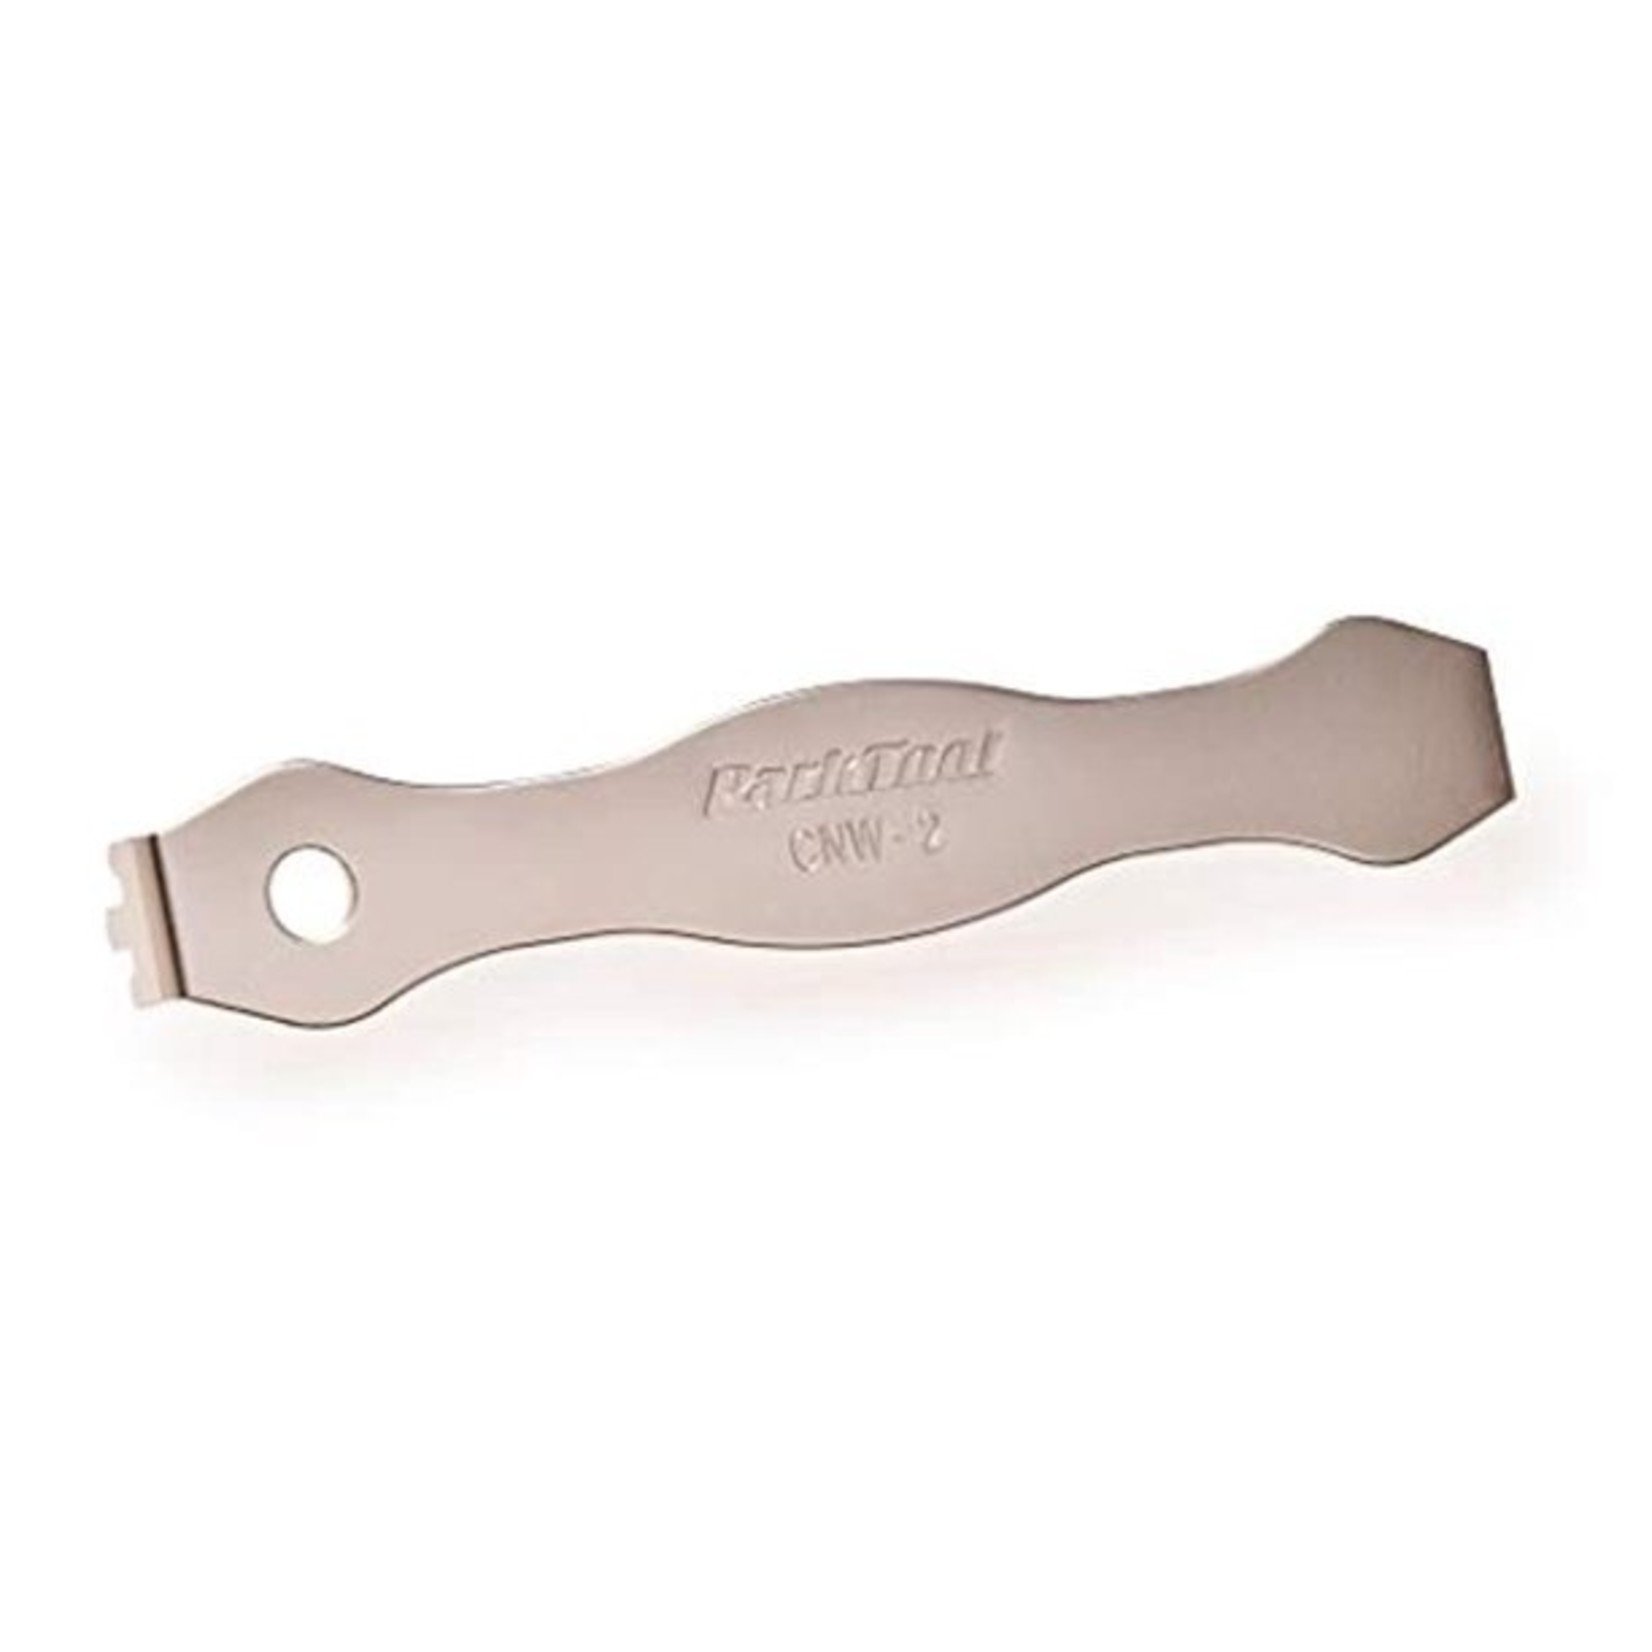 Park Park CNW-2 Chainring Wrench